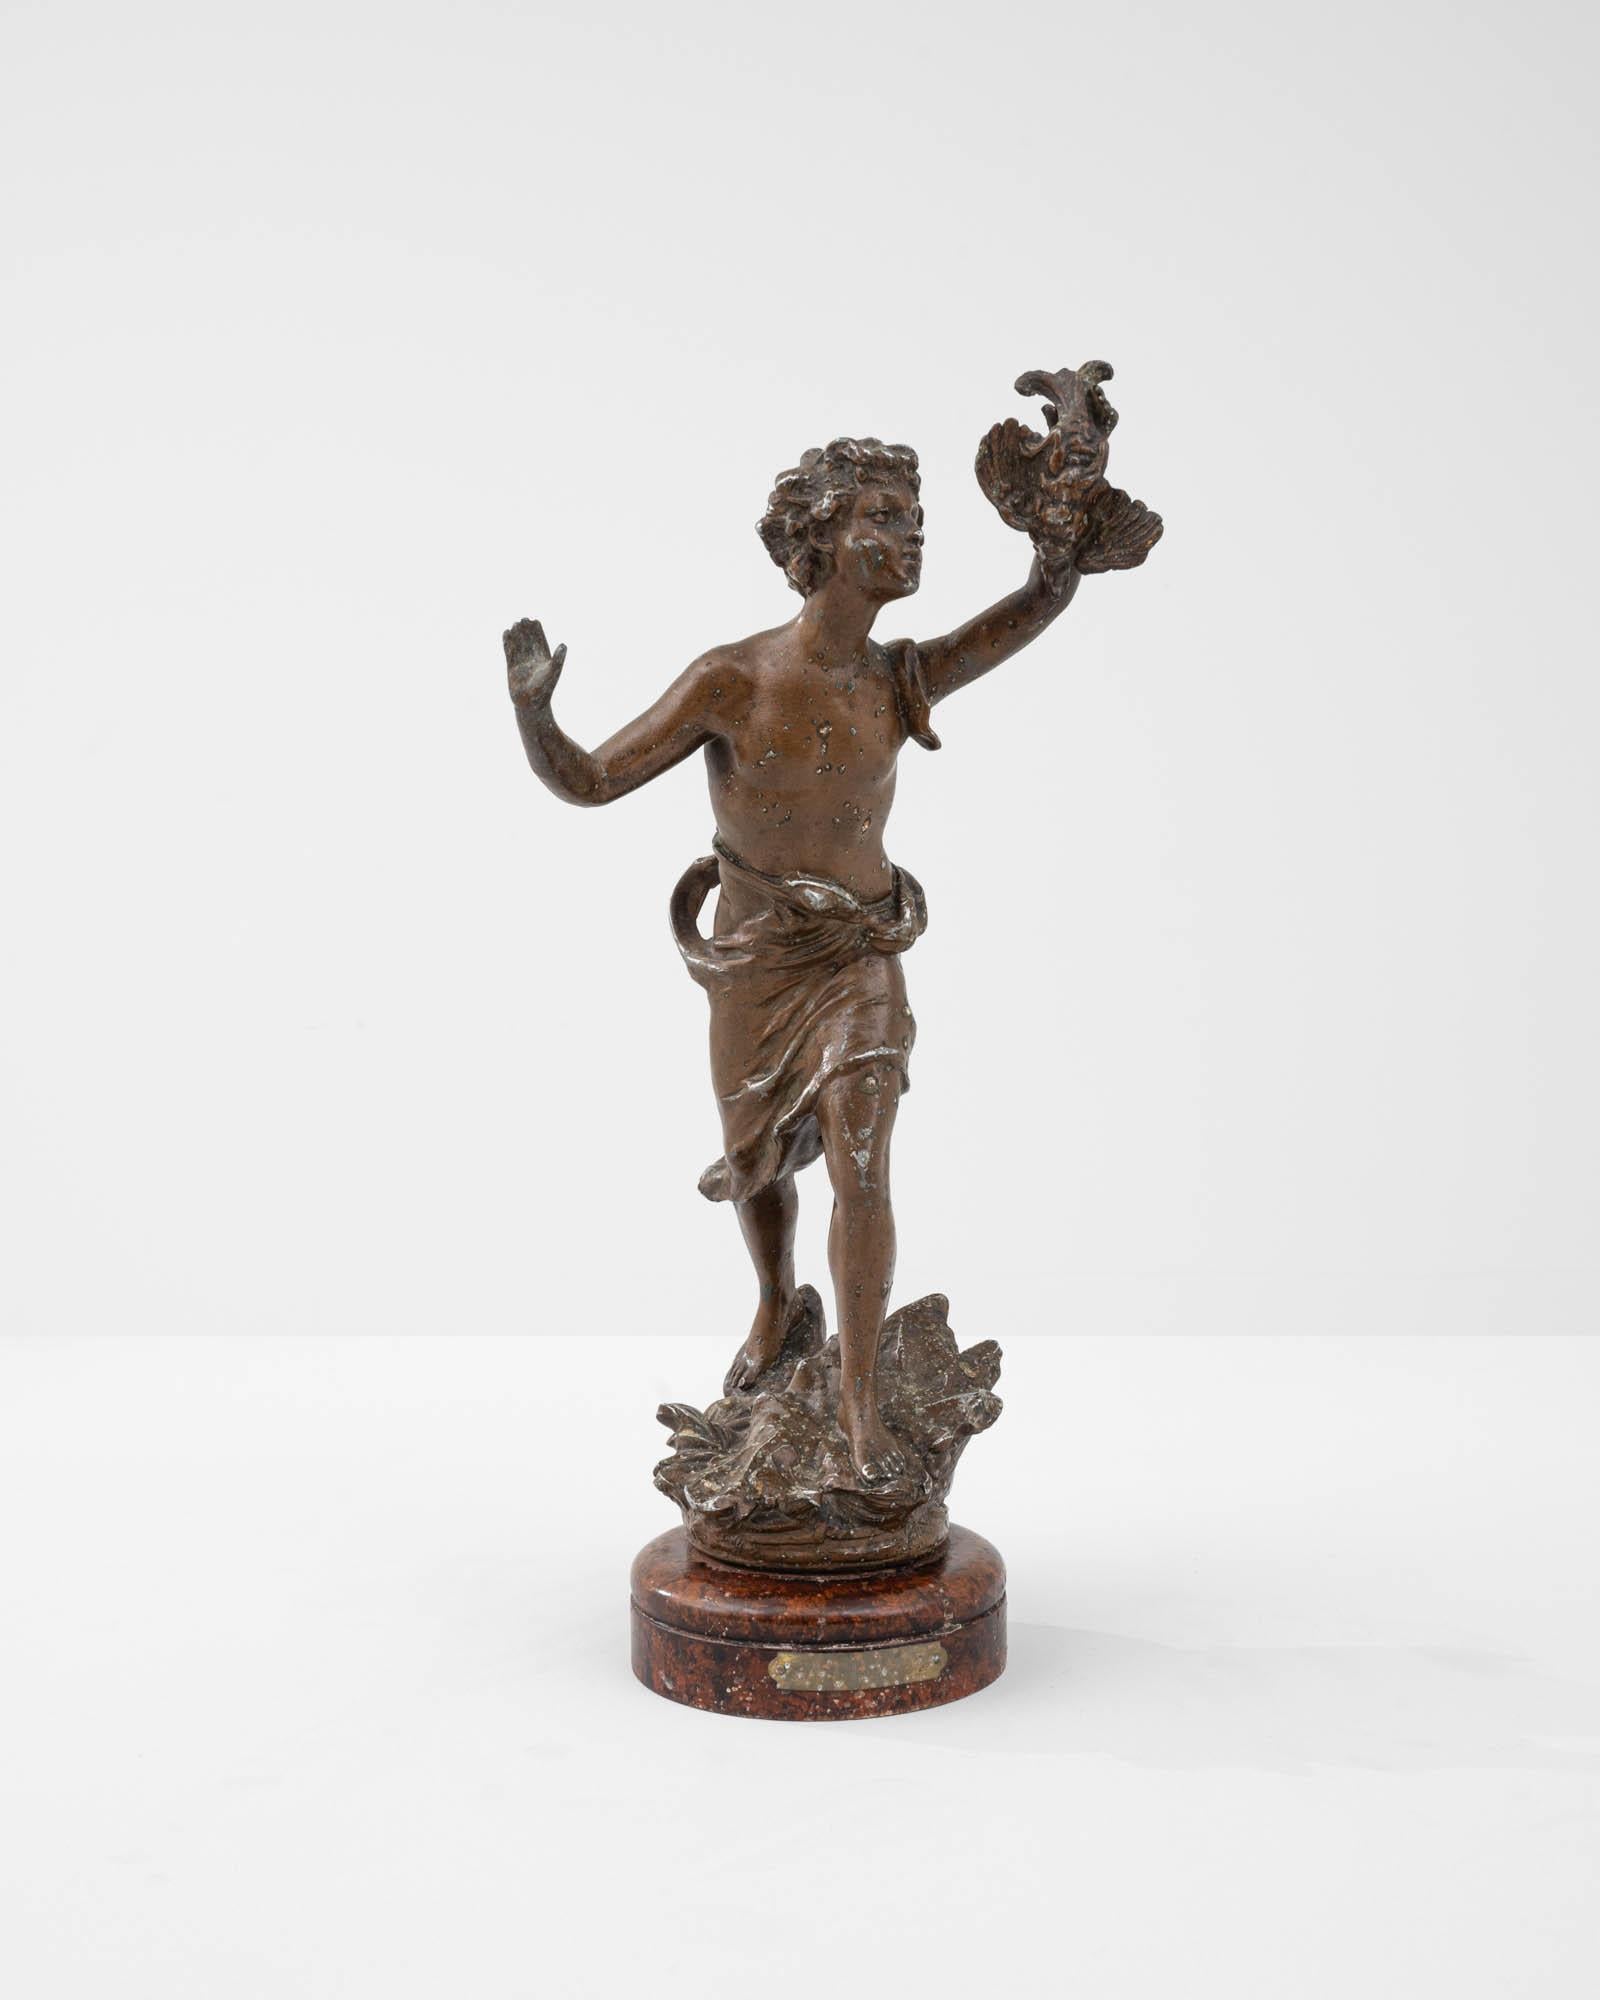 This metal figure was made in France at the turn of the 20th century. Depicting a youthful figure in motion, holding a bird aloft, the miniature sculpture recalls the classical motif of the youth and the dove. Made from tin, the metal has been